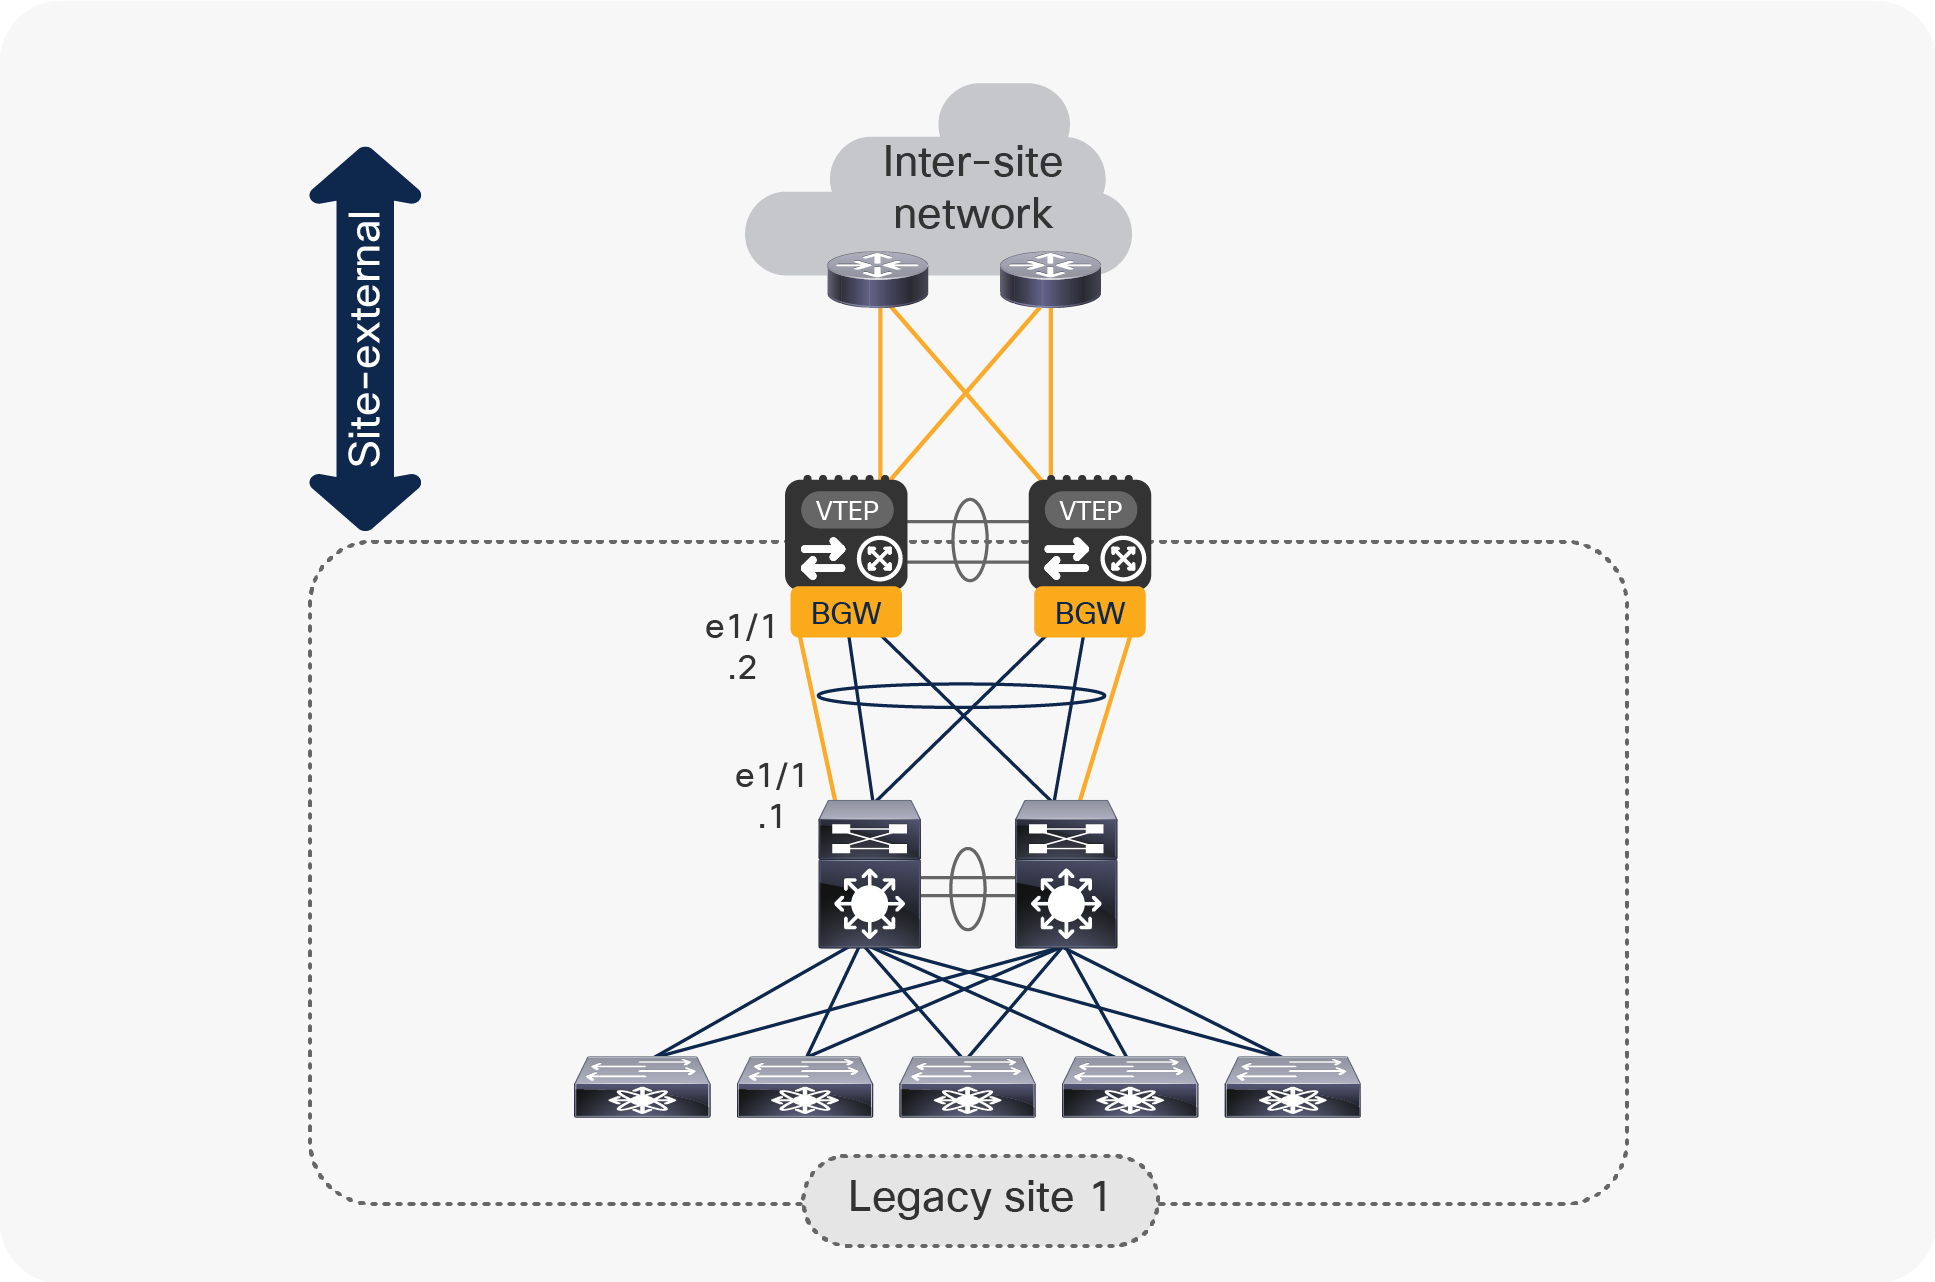 Use of dedicated Layer 3 links between vPC BGW nodes and the legacy network